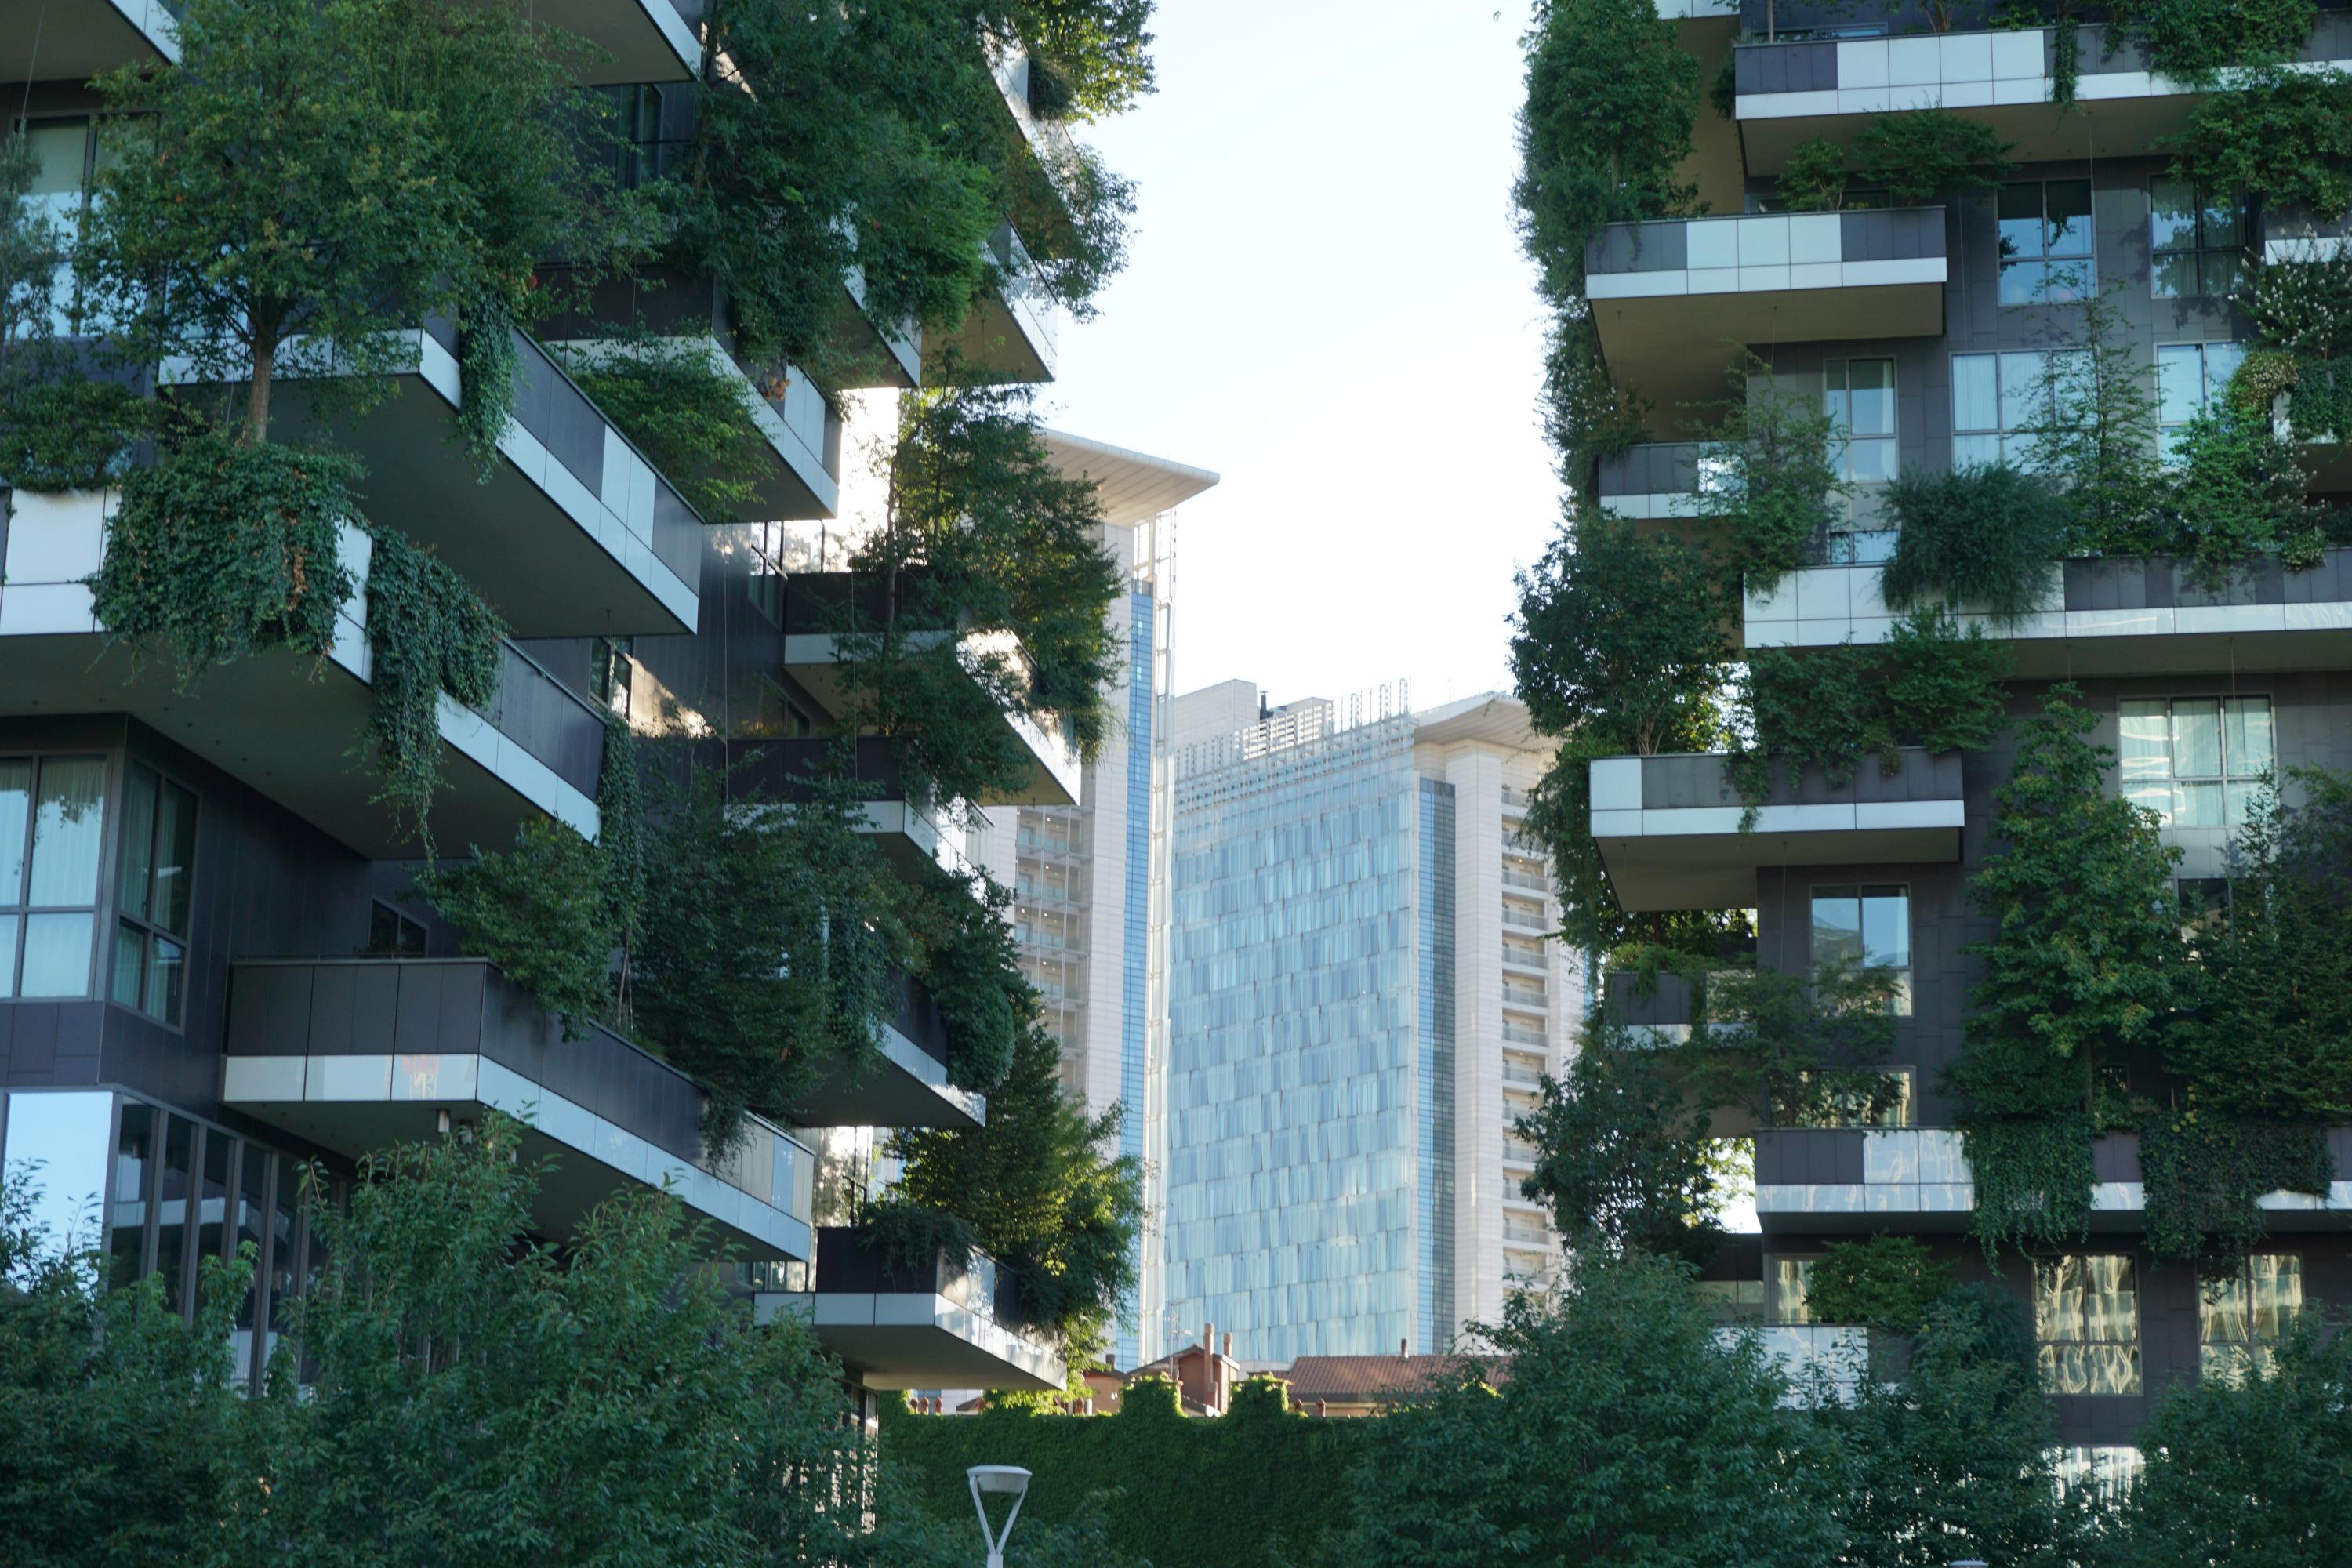 Image of green building with plants growing on its balconies